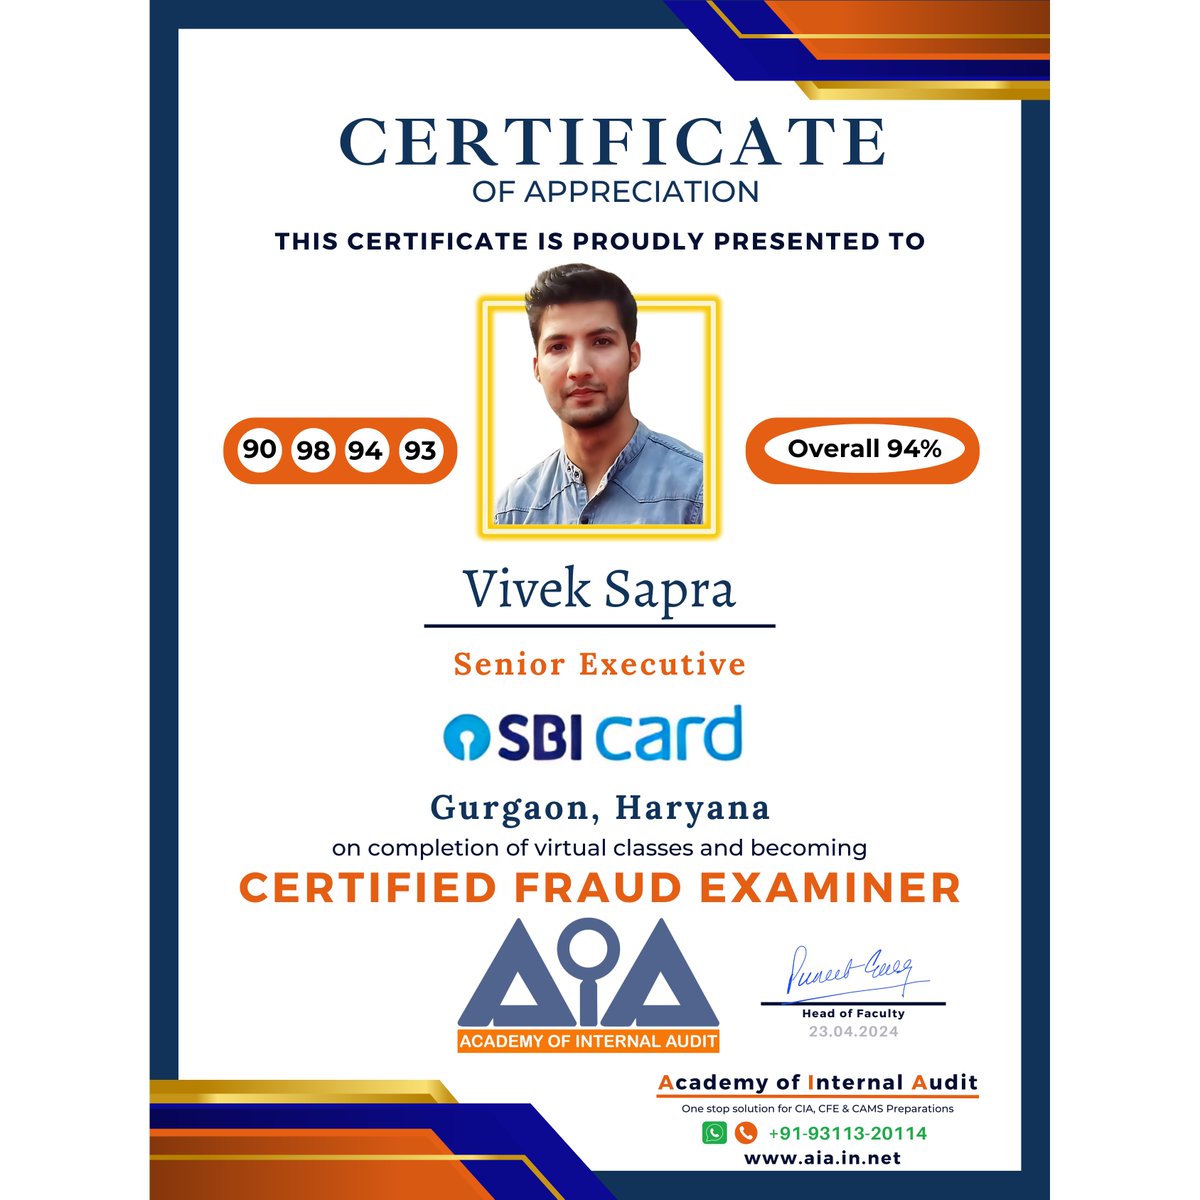 🎉Congratulations to Vivek Sapra, CFE, on achieving the prestigious Certified Fraud Examiner credential!
🌟May your journey ahead be filled with ongoing success and prosperity!🚀
#Congratulations #success #Congrats #certifiedfraudexaminer #AIA #CAMS #CFE #CIA #CIAChallenge #ACFE